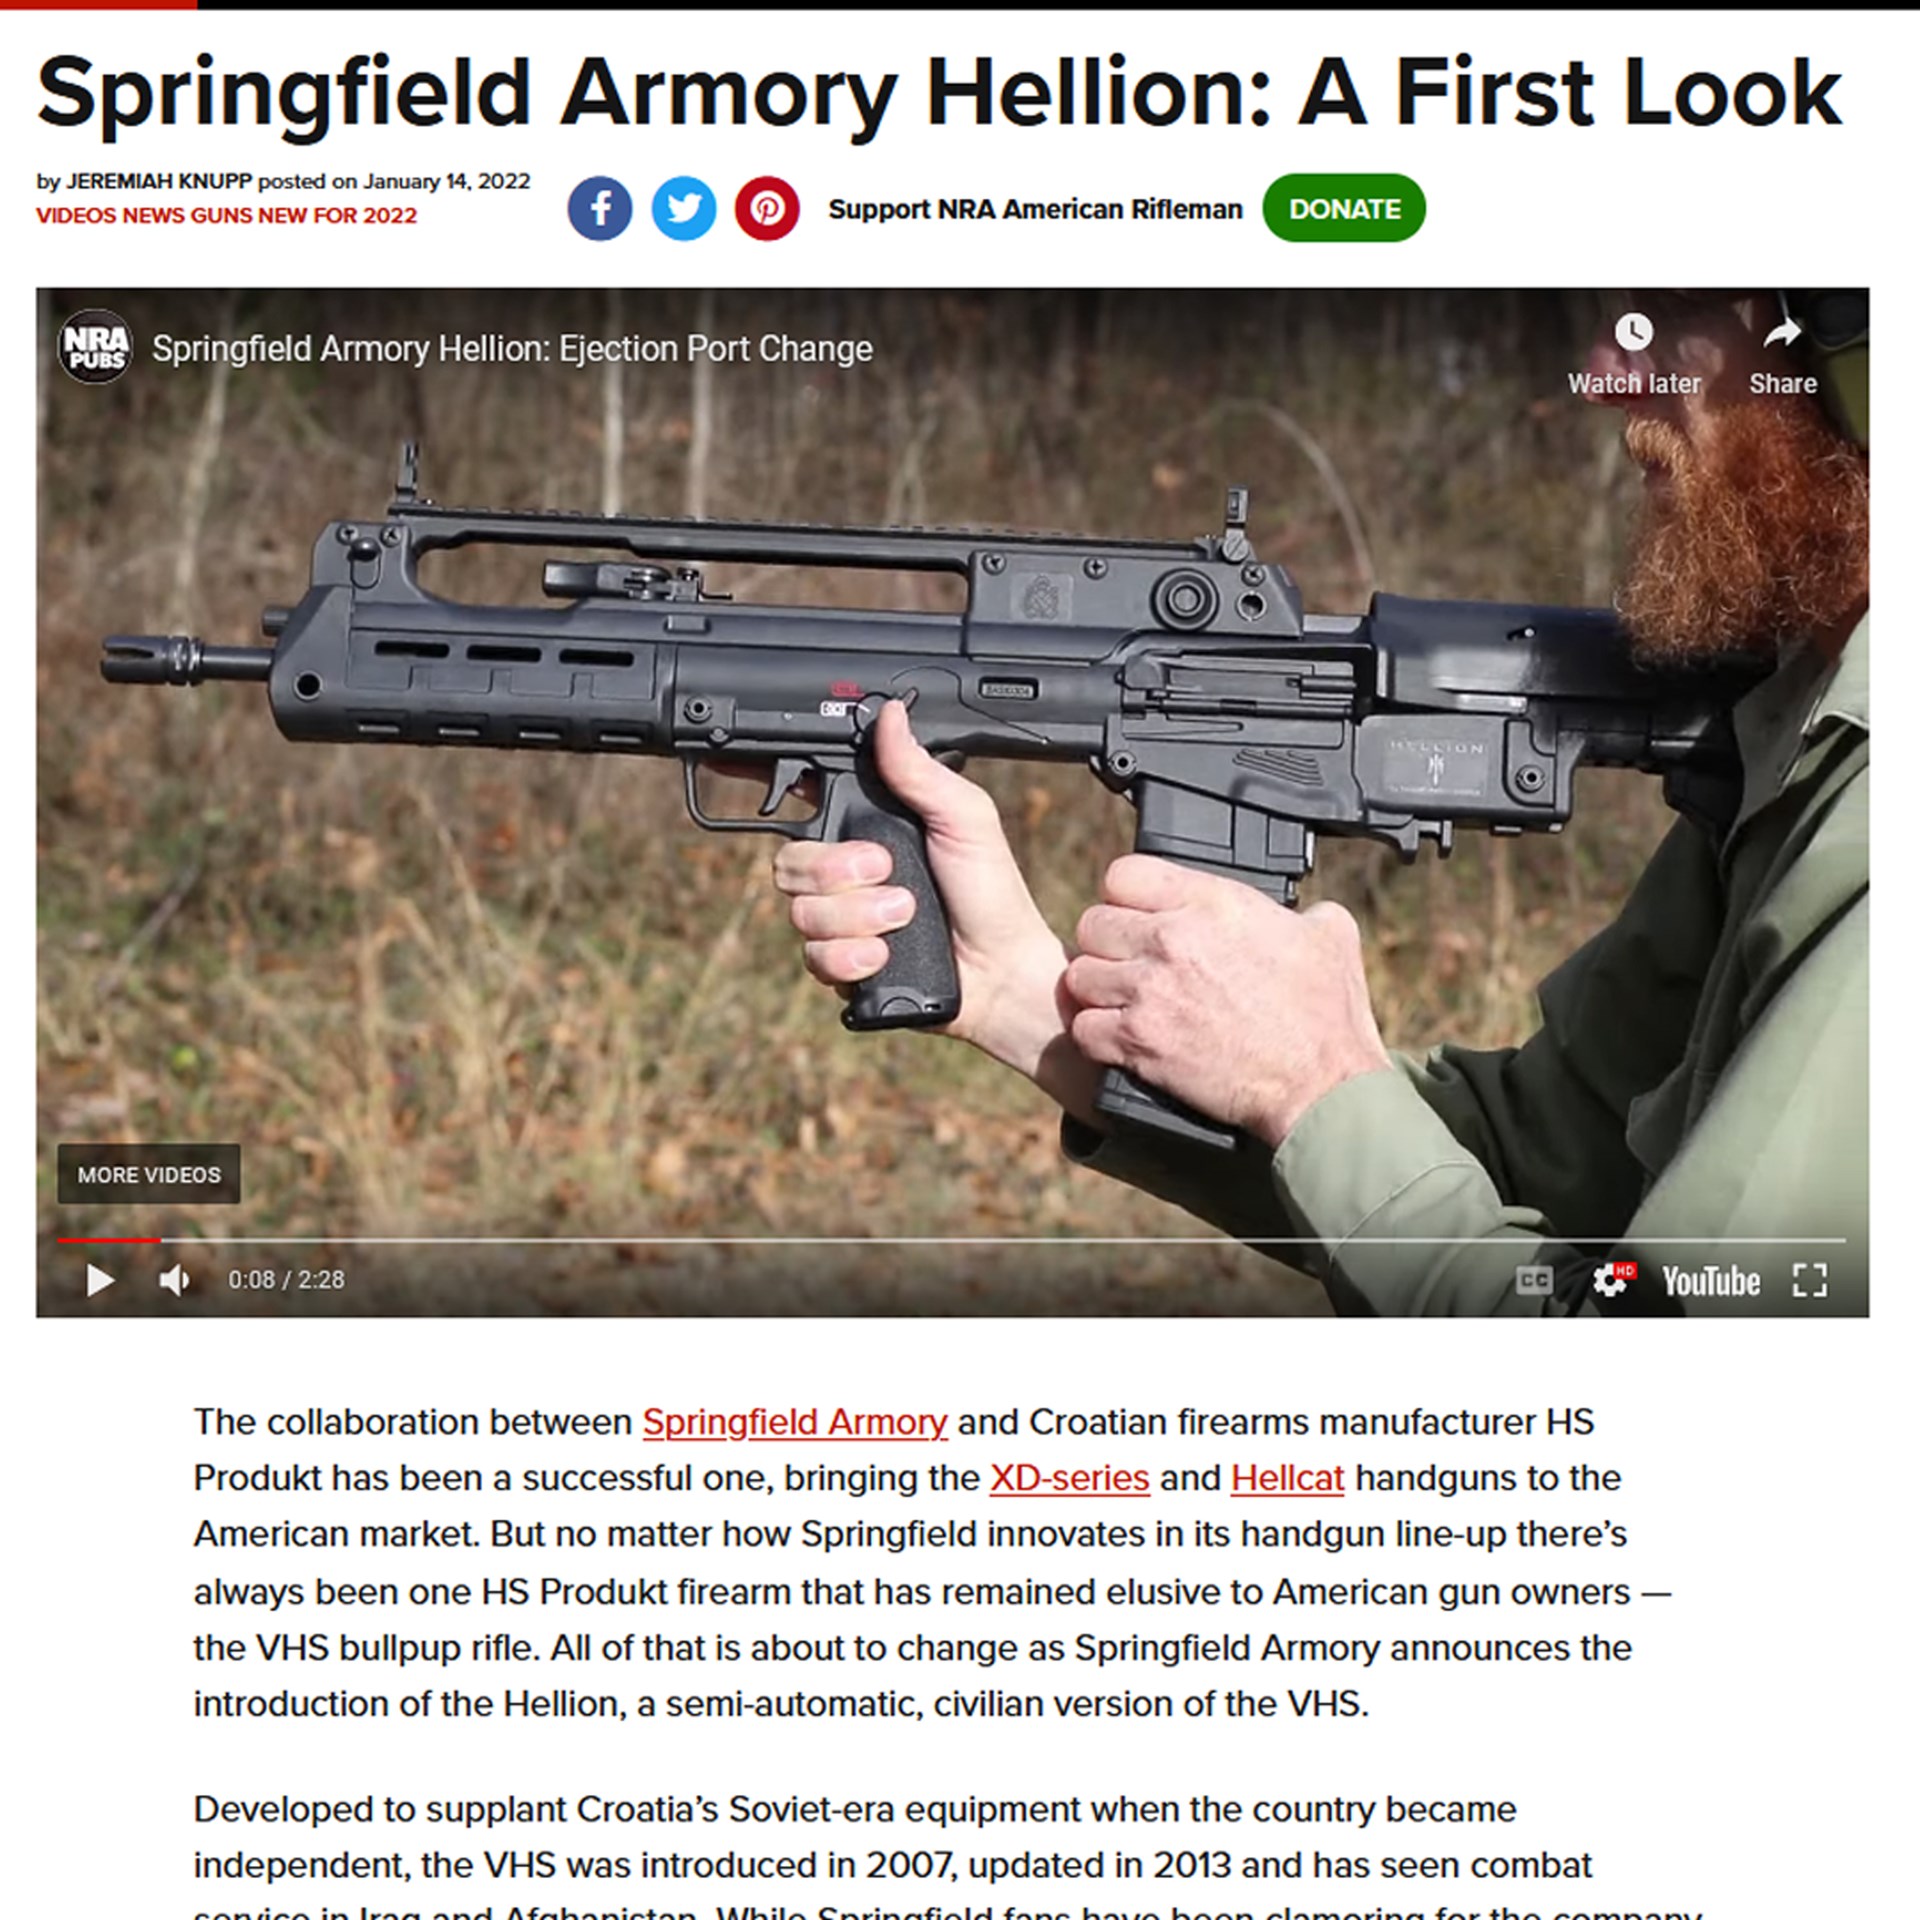 Screenshot of webpage about Springfield Armory Hellion bullpup rifle showing man outdoors and left-side view of black gun youtube player video text description below